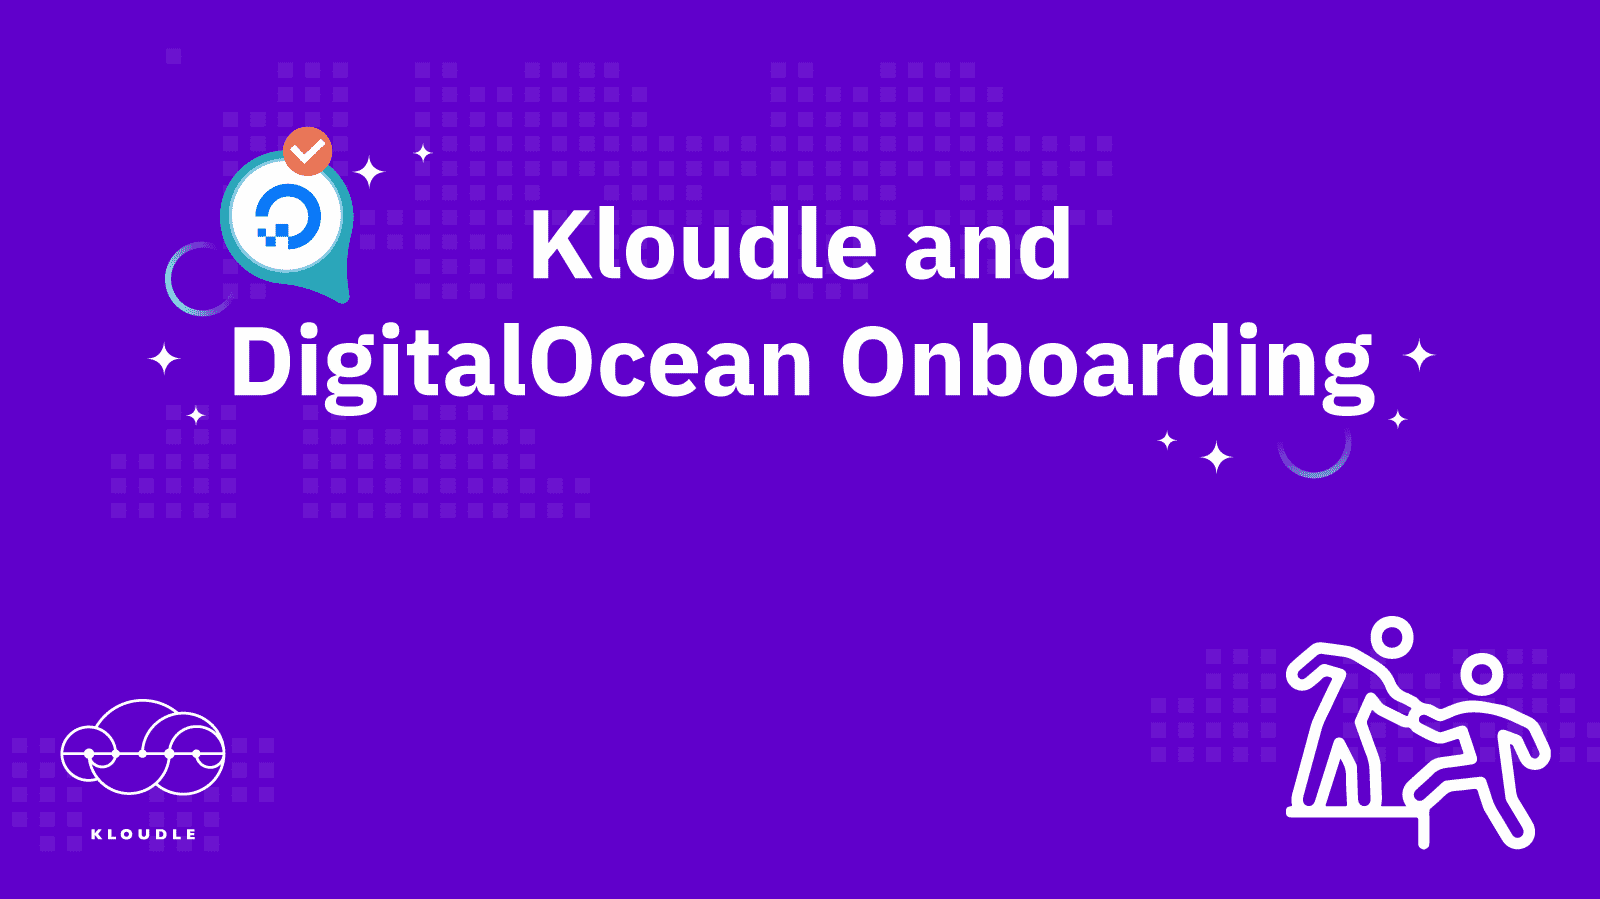 How to onboard DigitalOcean to Kloudle